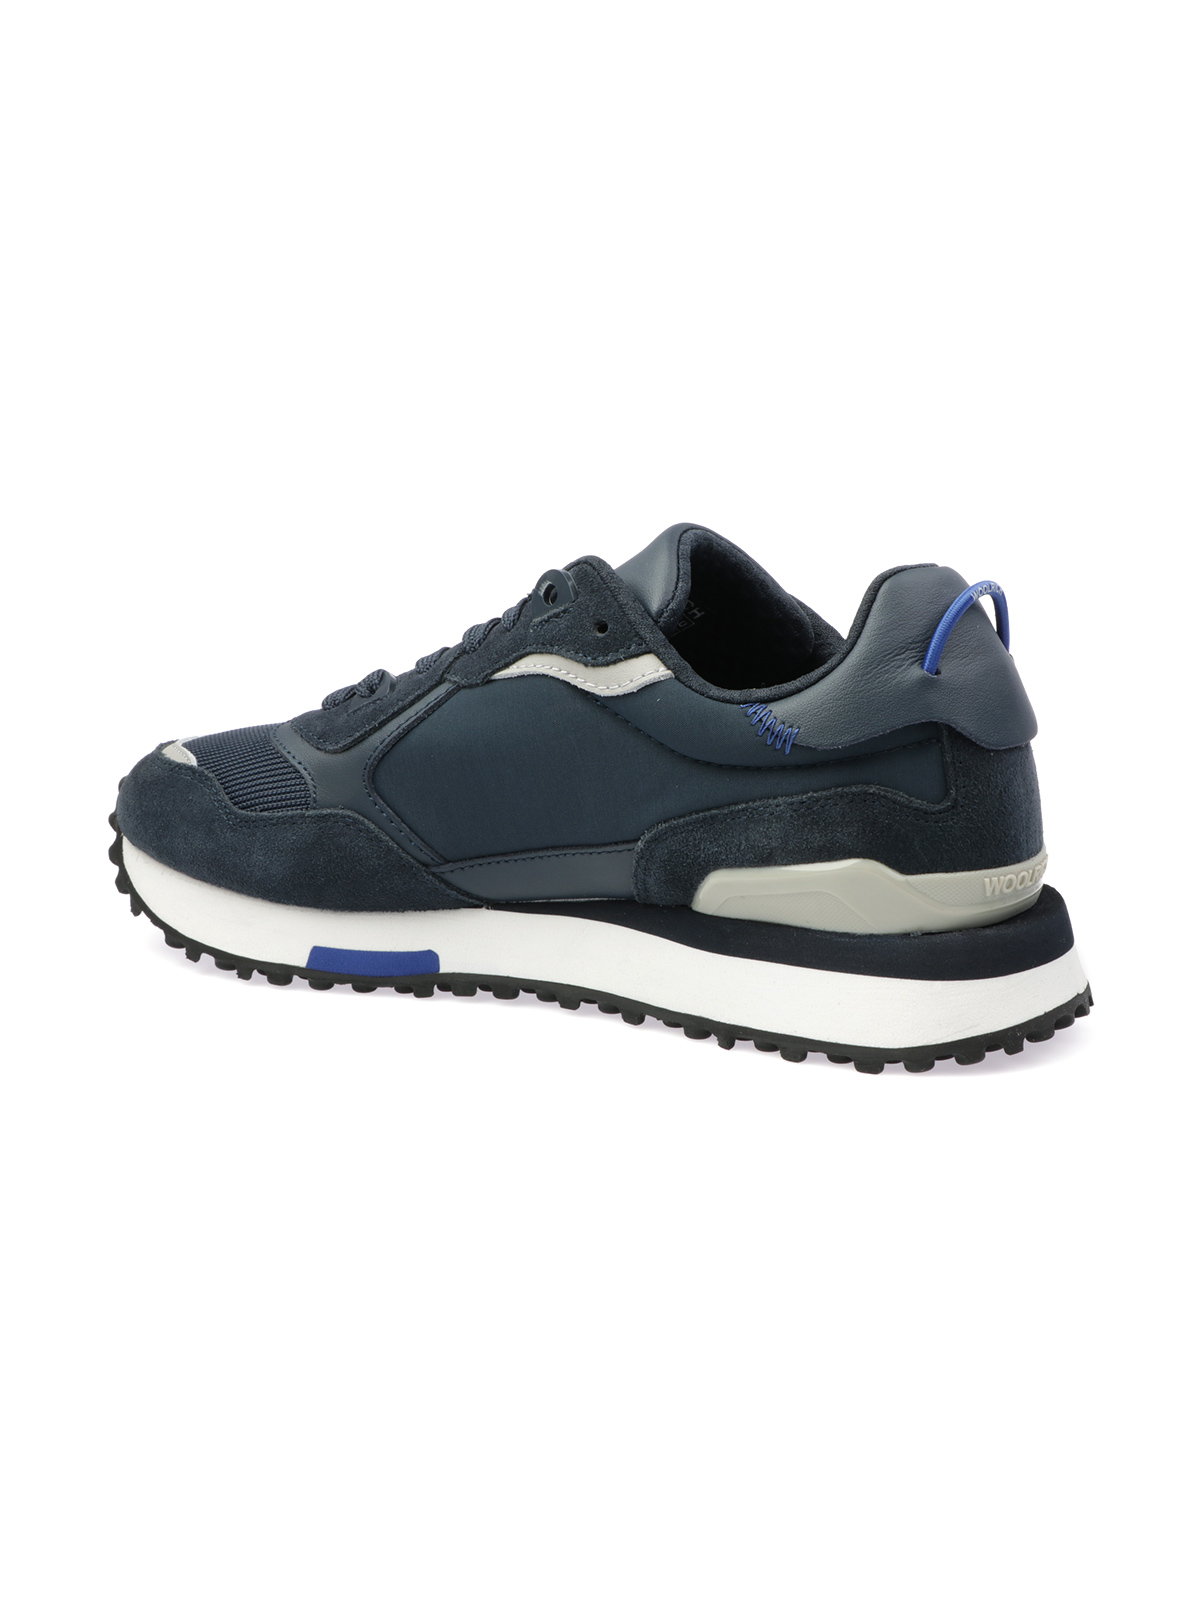 Picture of WOOLRICH | Men's Running Camoscio Sneakers